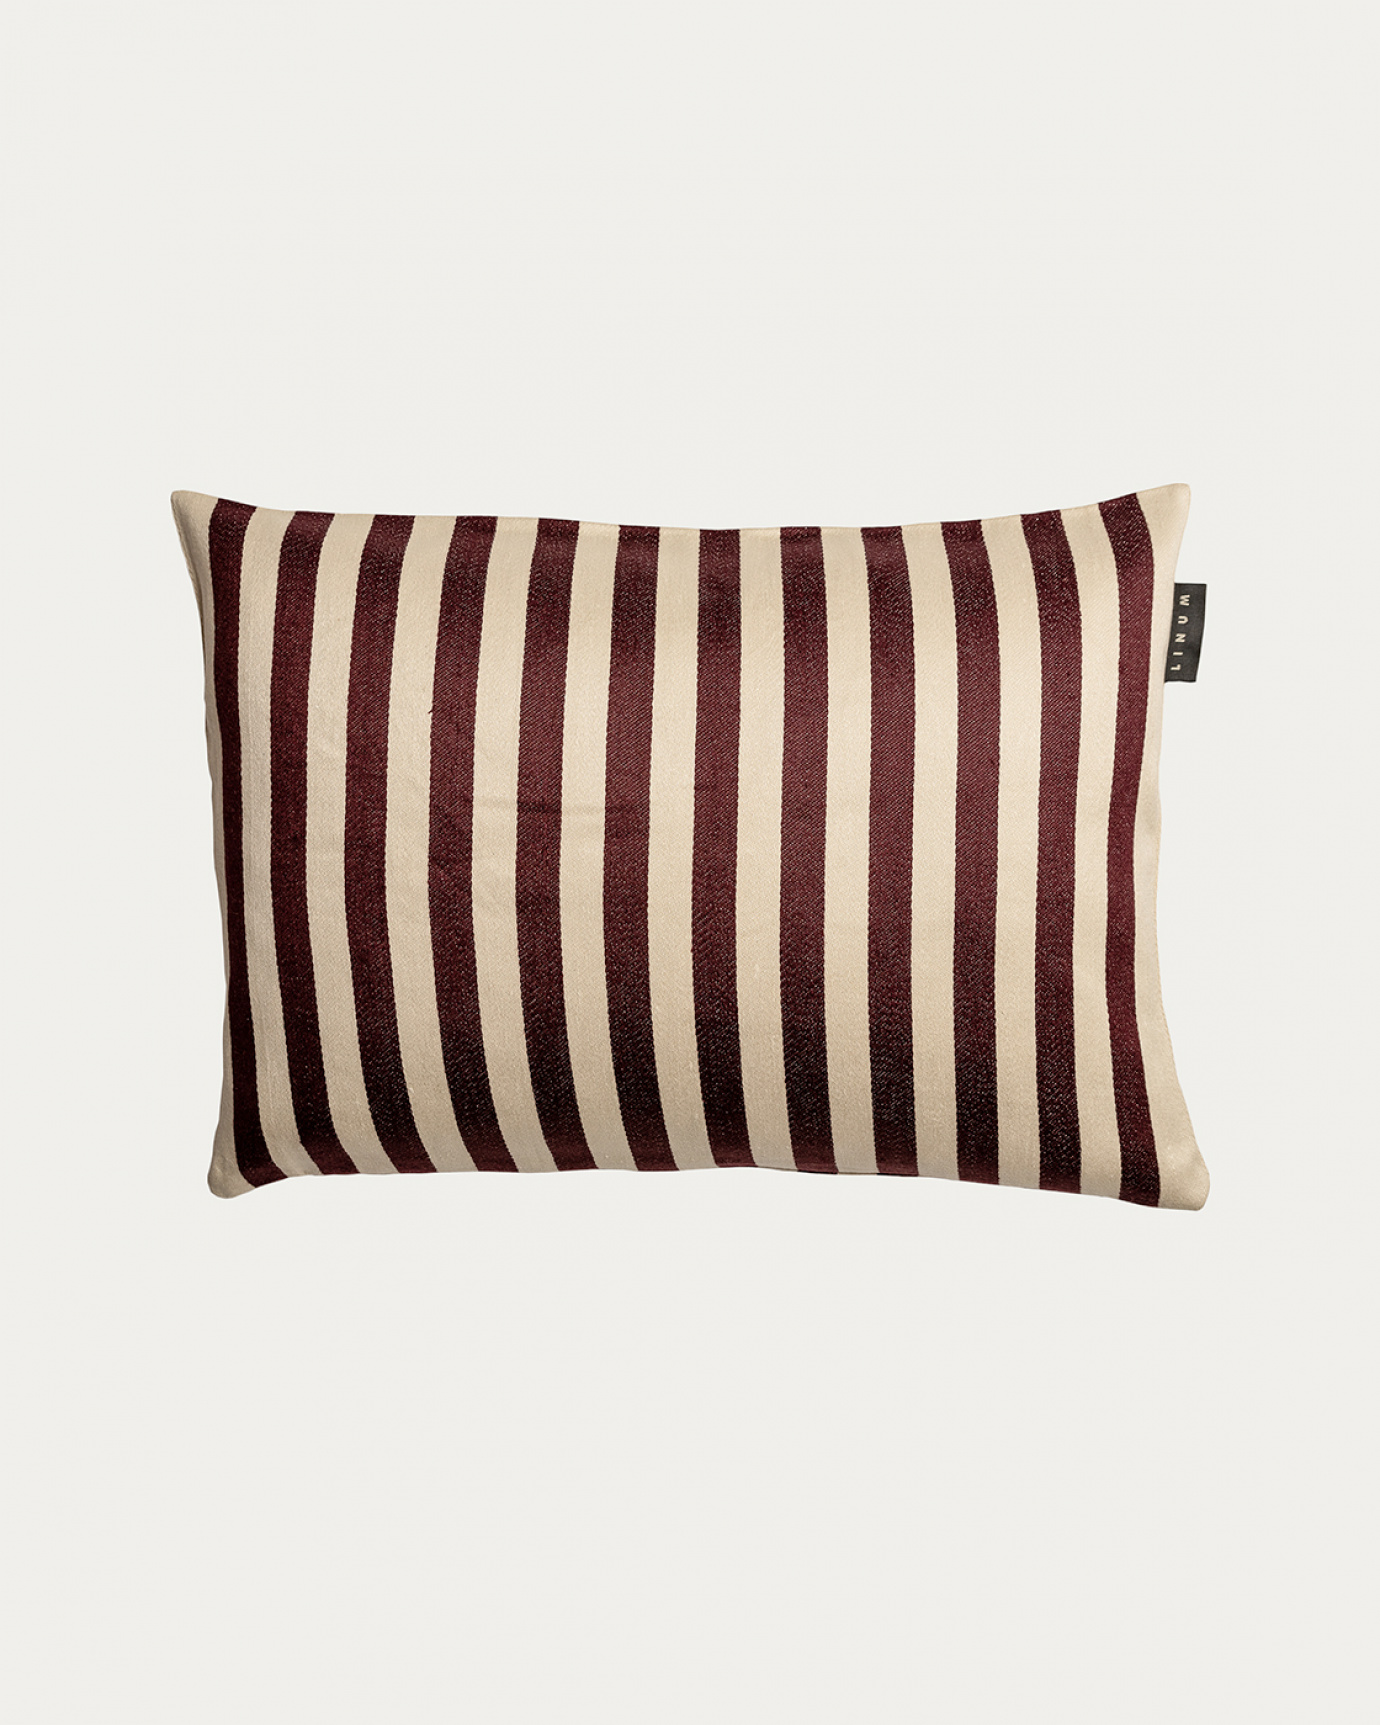 Product image dark burgundy red AMALFI cushion cover with wide stripes made of 77% linen and 23% cotton from LINUM DESIGN. Size 35x50 cm.